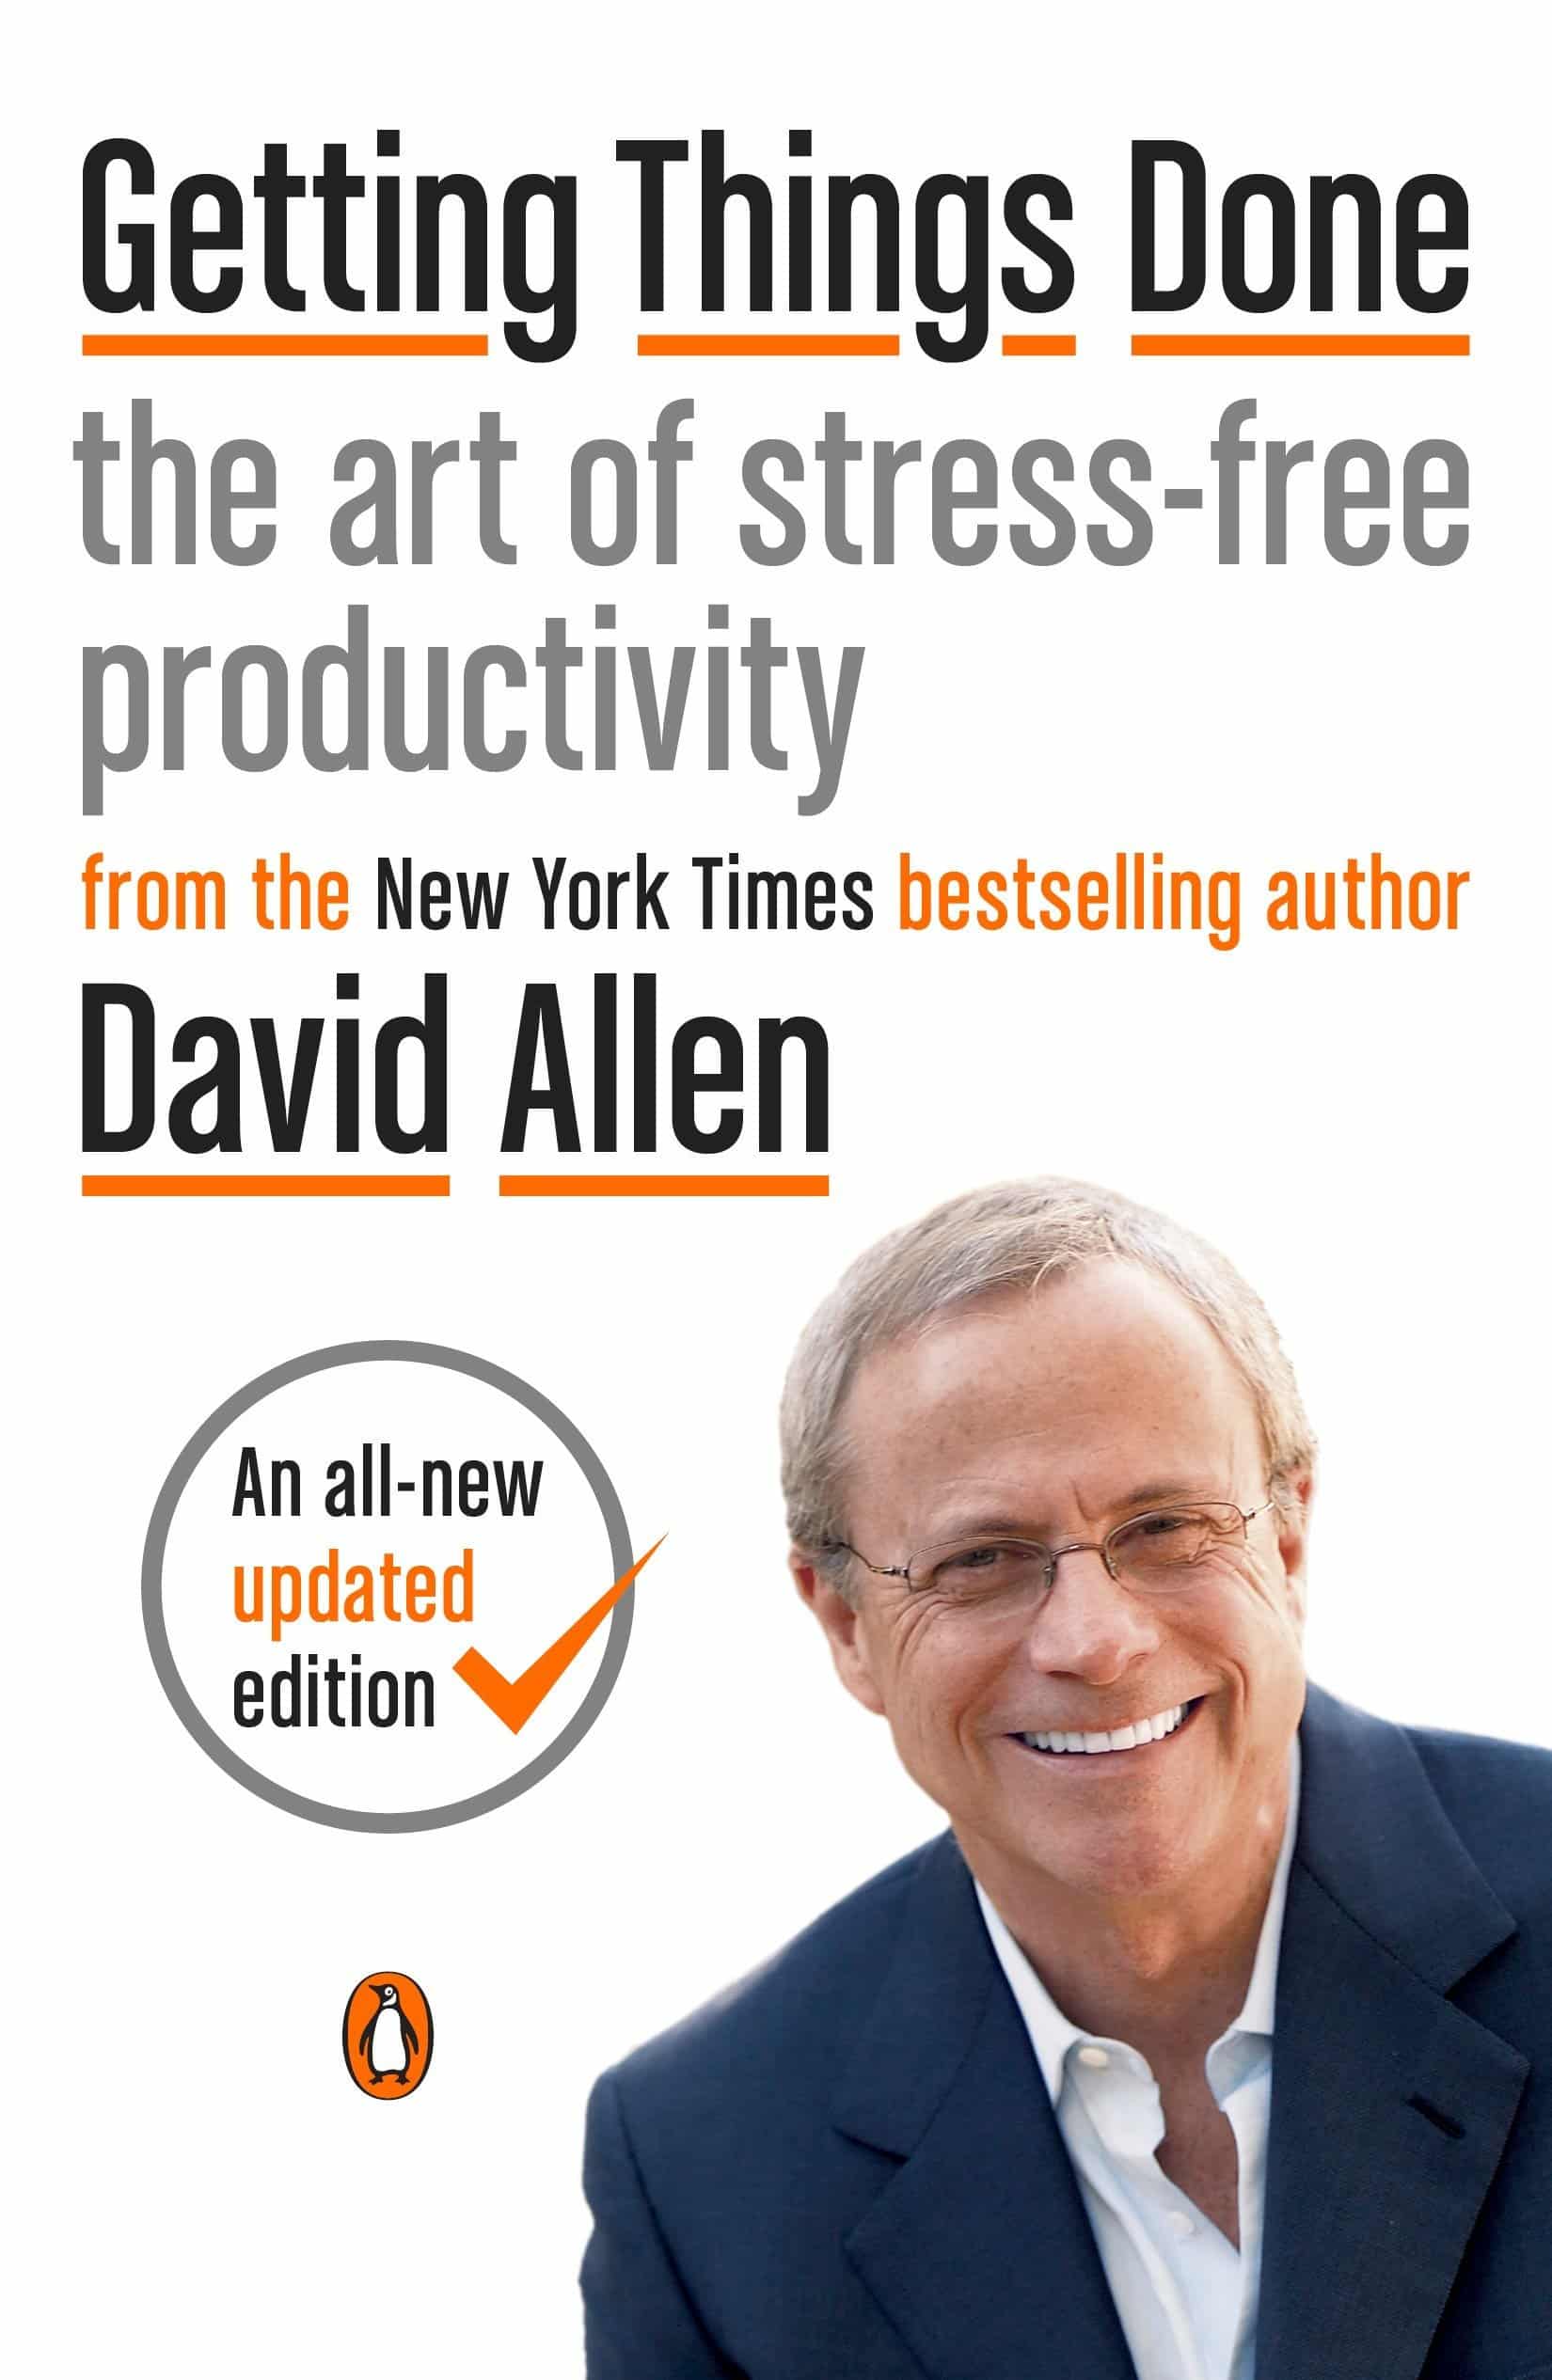 Getting Things Done The Art of Stress-Free Productivity by David Allen